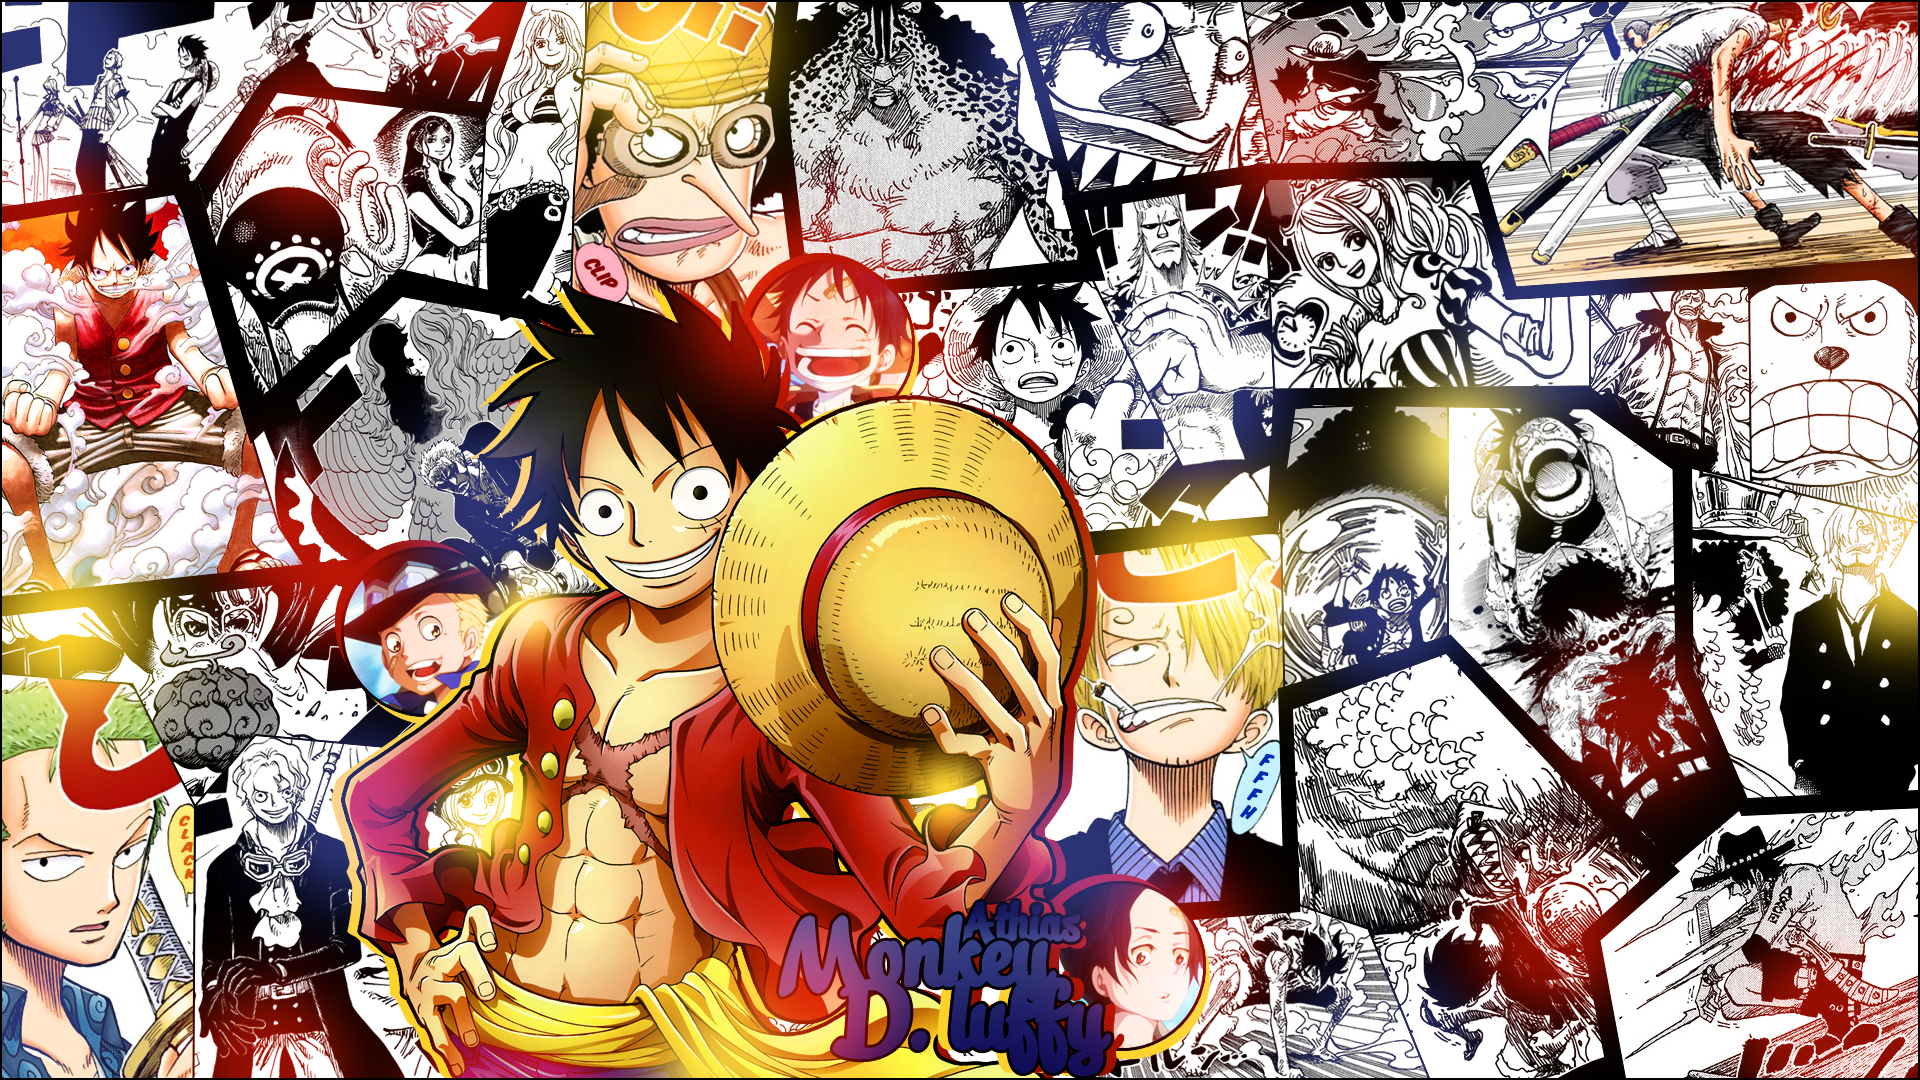 wallpaper___one_piece_by_athias95 d8intov